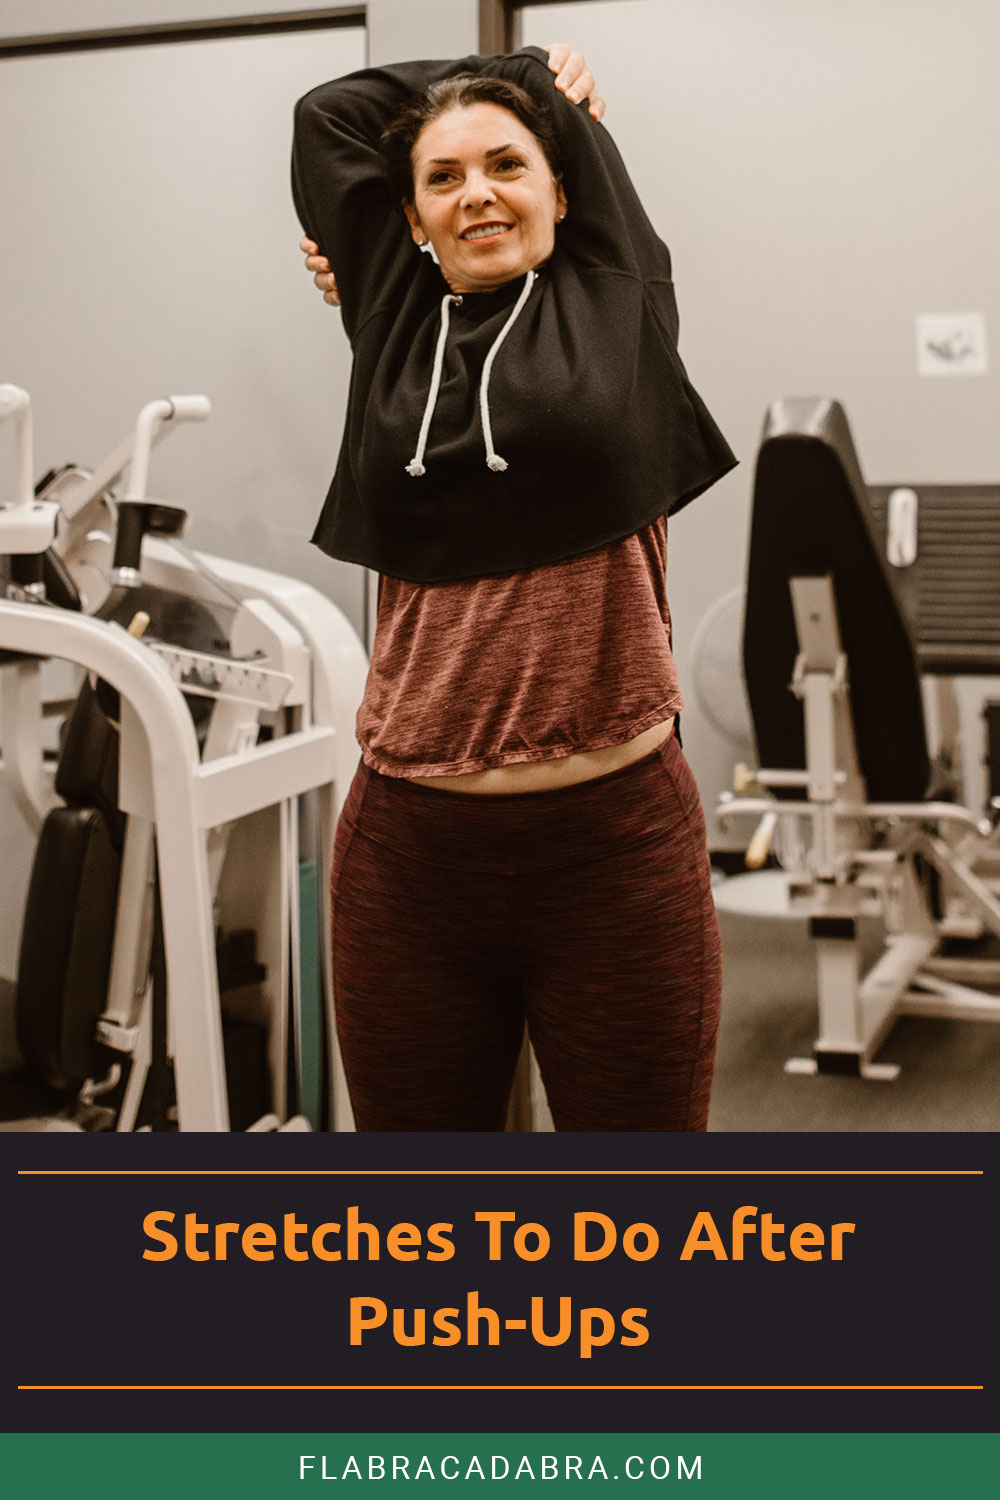 Stretches To Do After Push-Ups